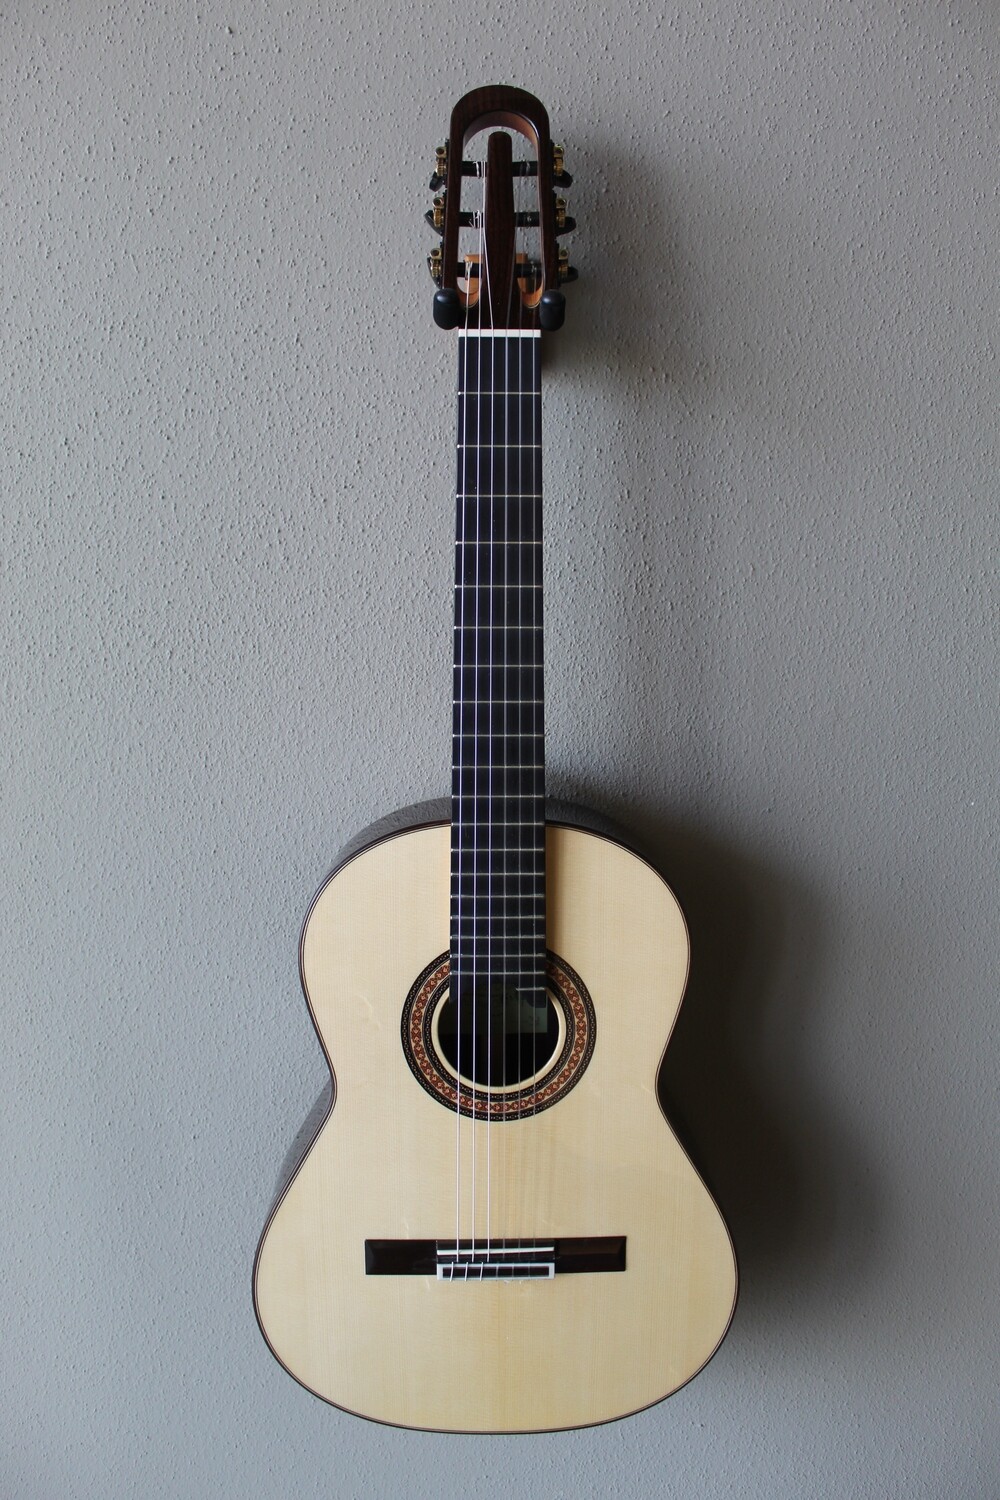 Yulong Guo Echoes Parlor Size Classical Guitar with Spruce Double Top - 630mm Scale